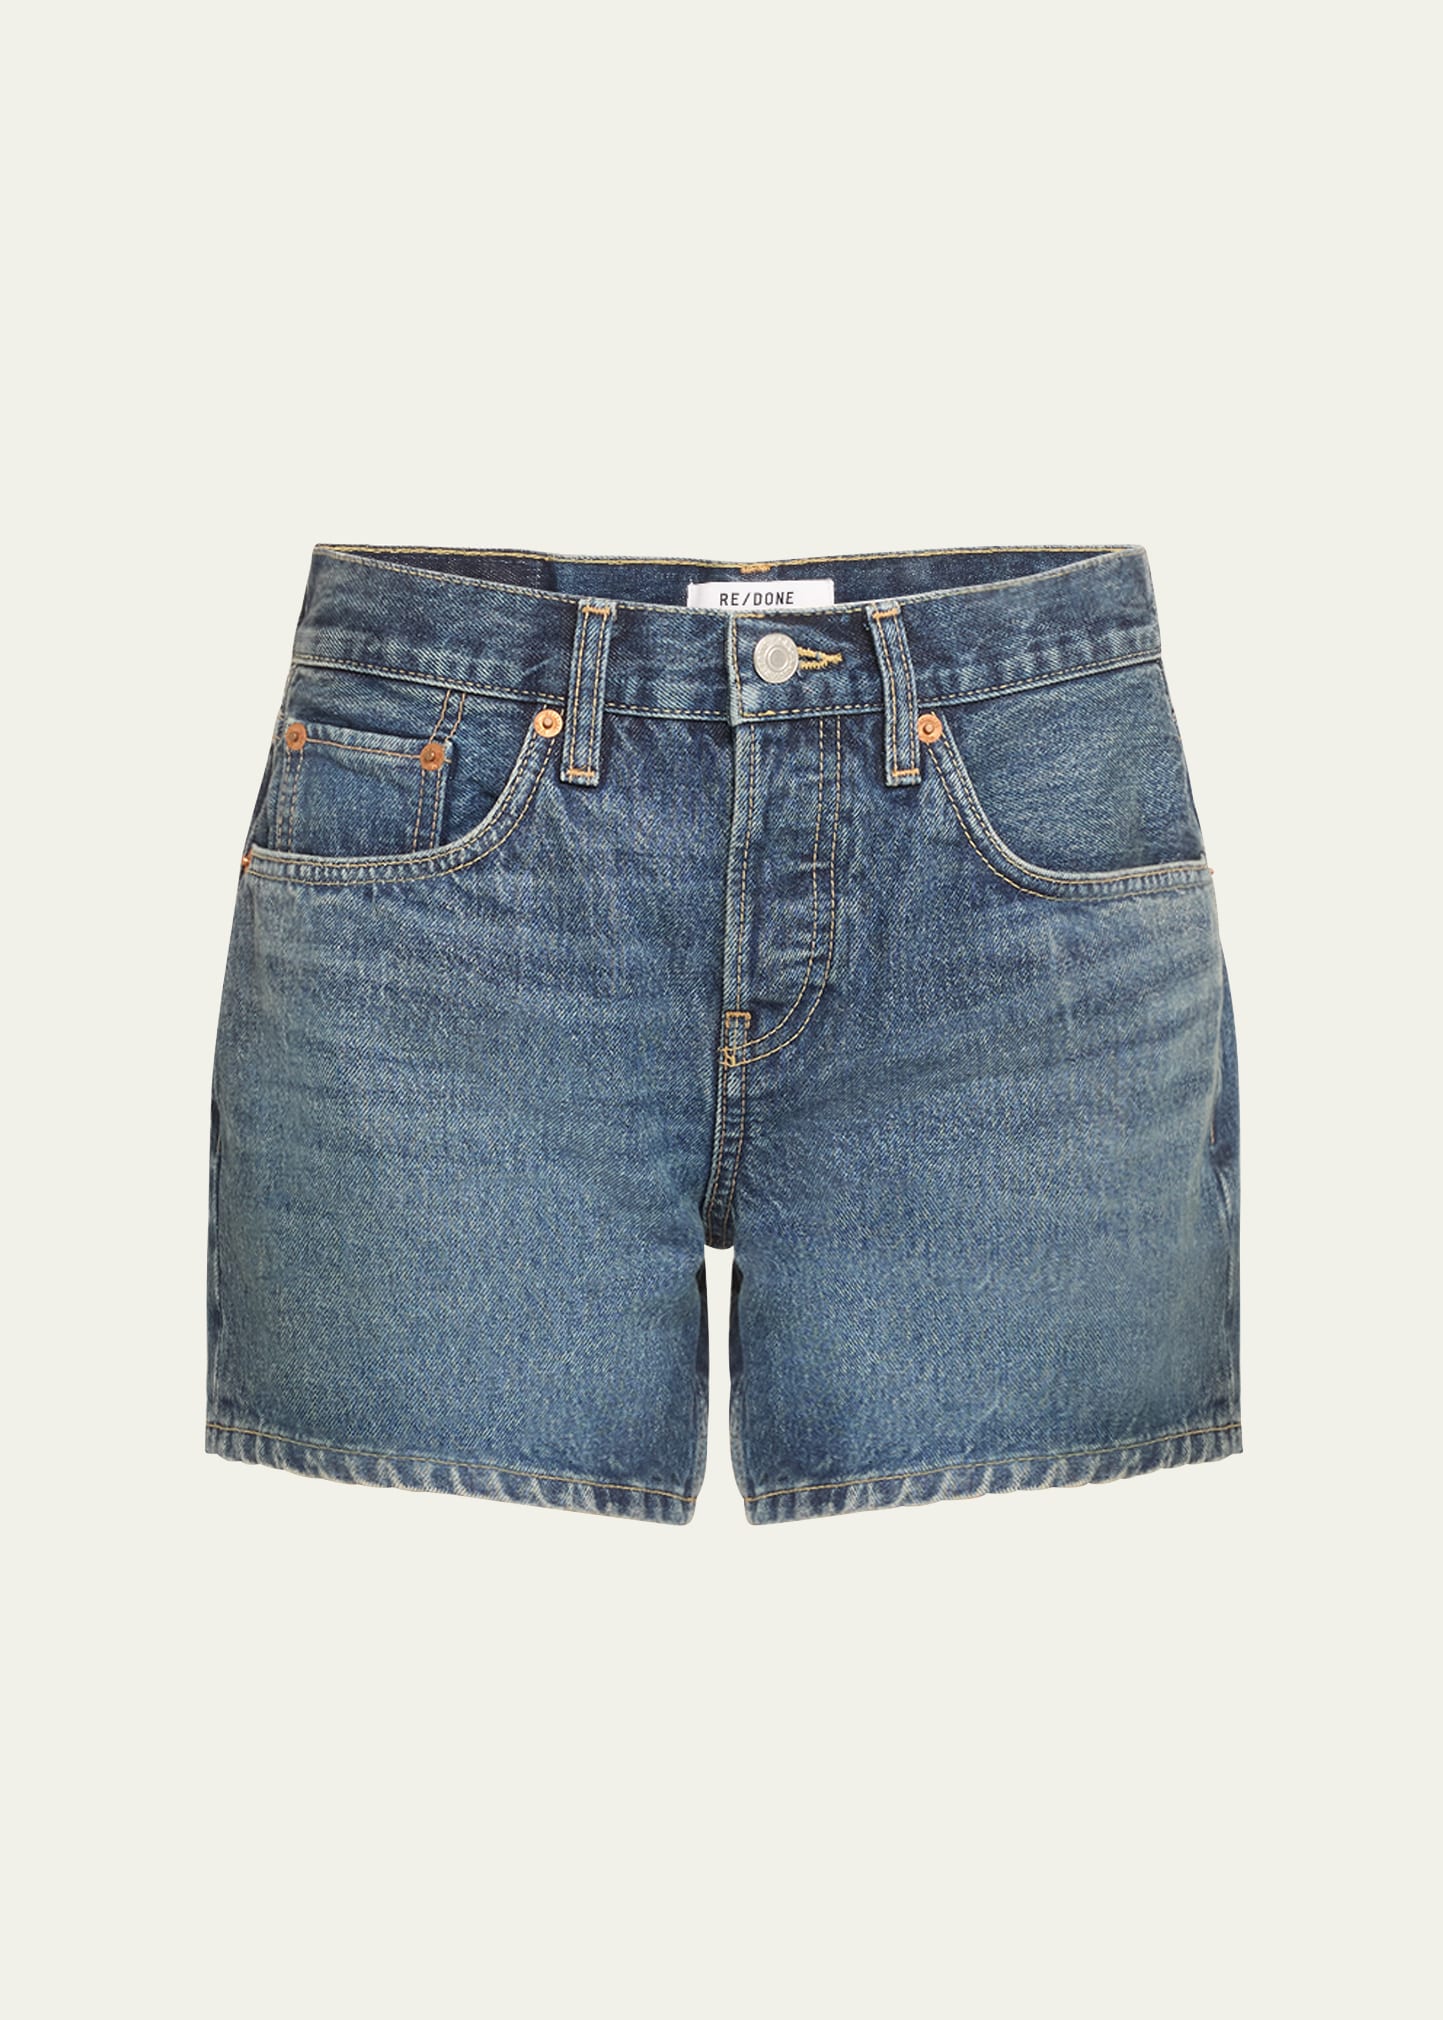 Re/done Mid-rise Denim Boy Shorts In Whiskeyind